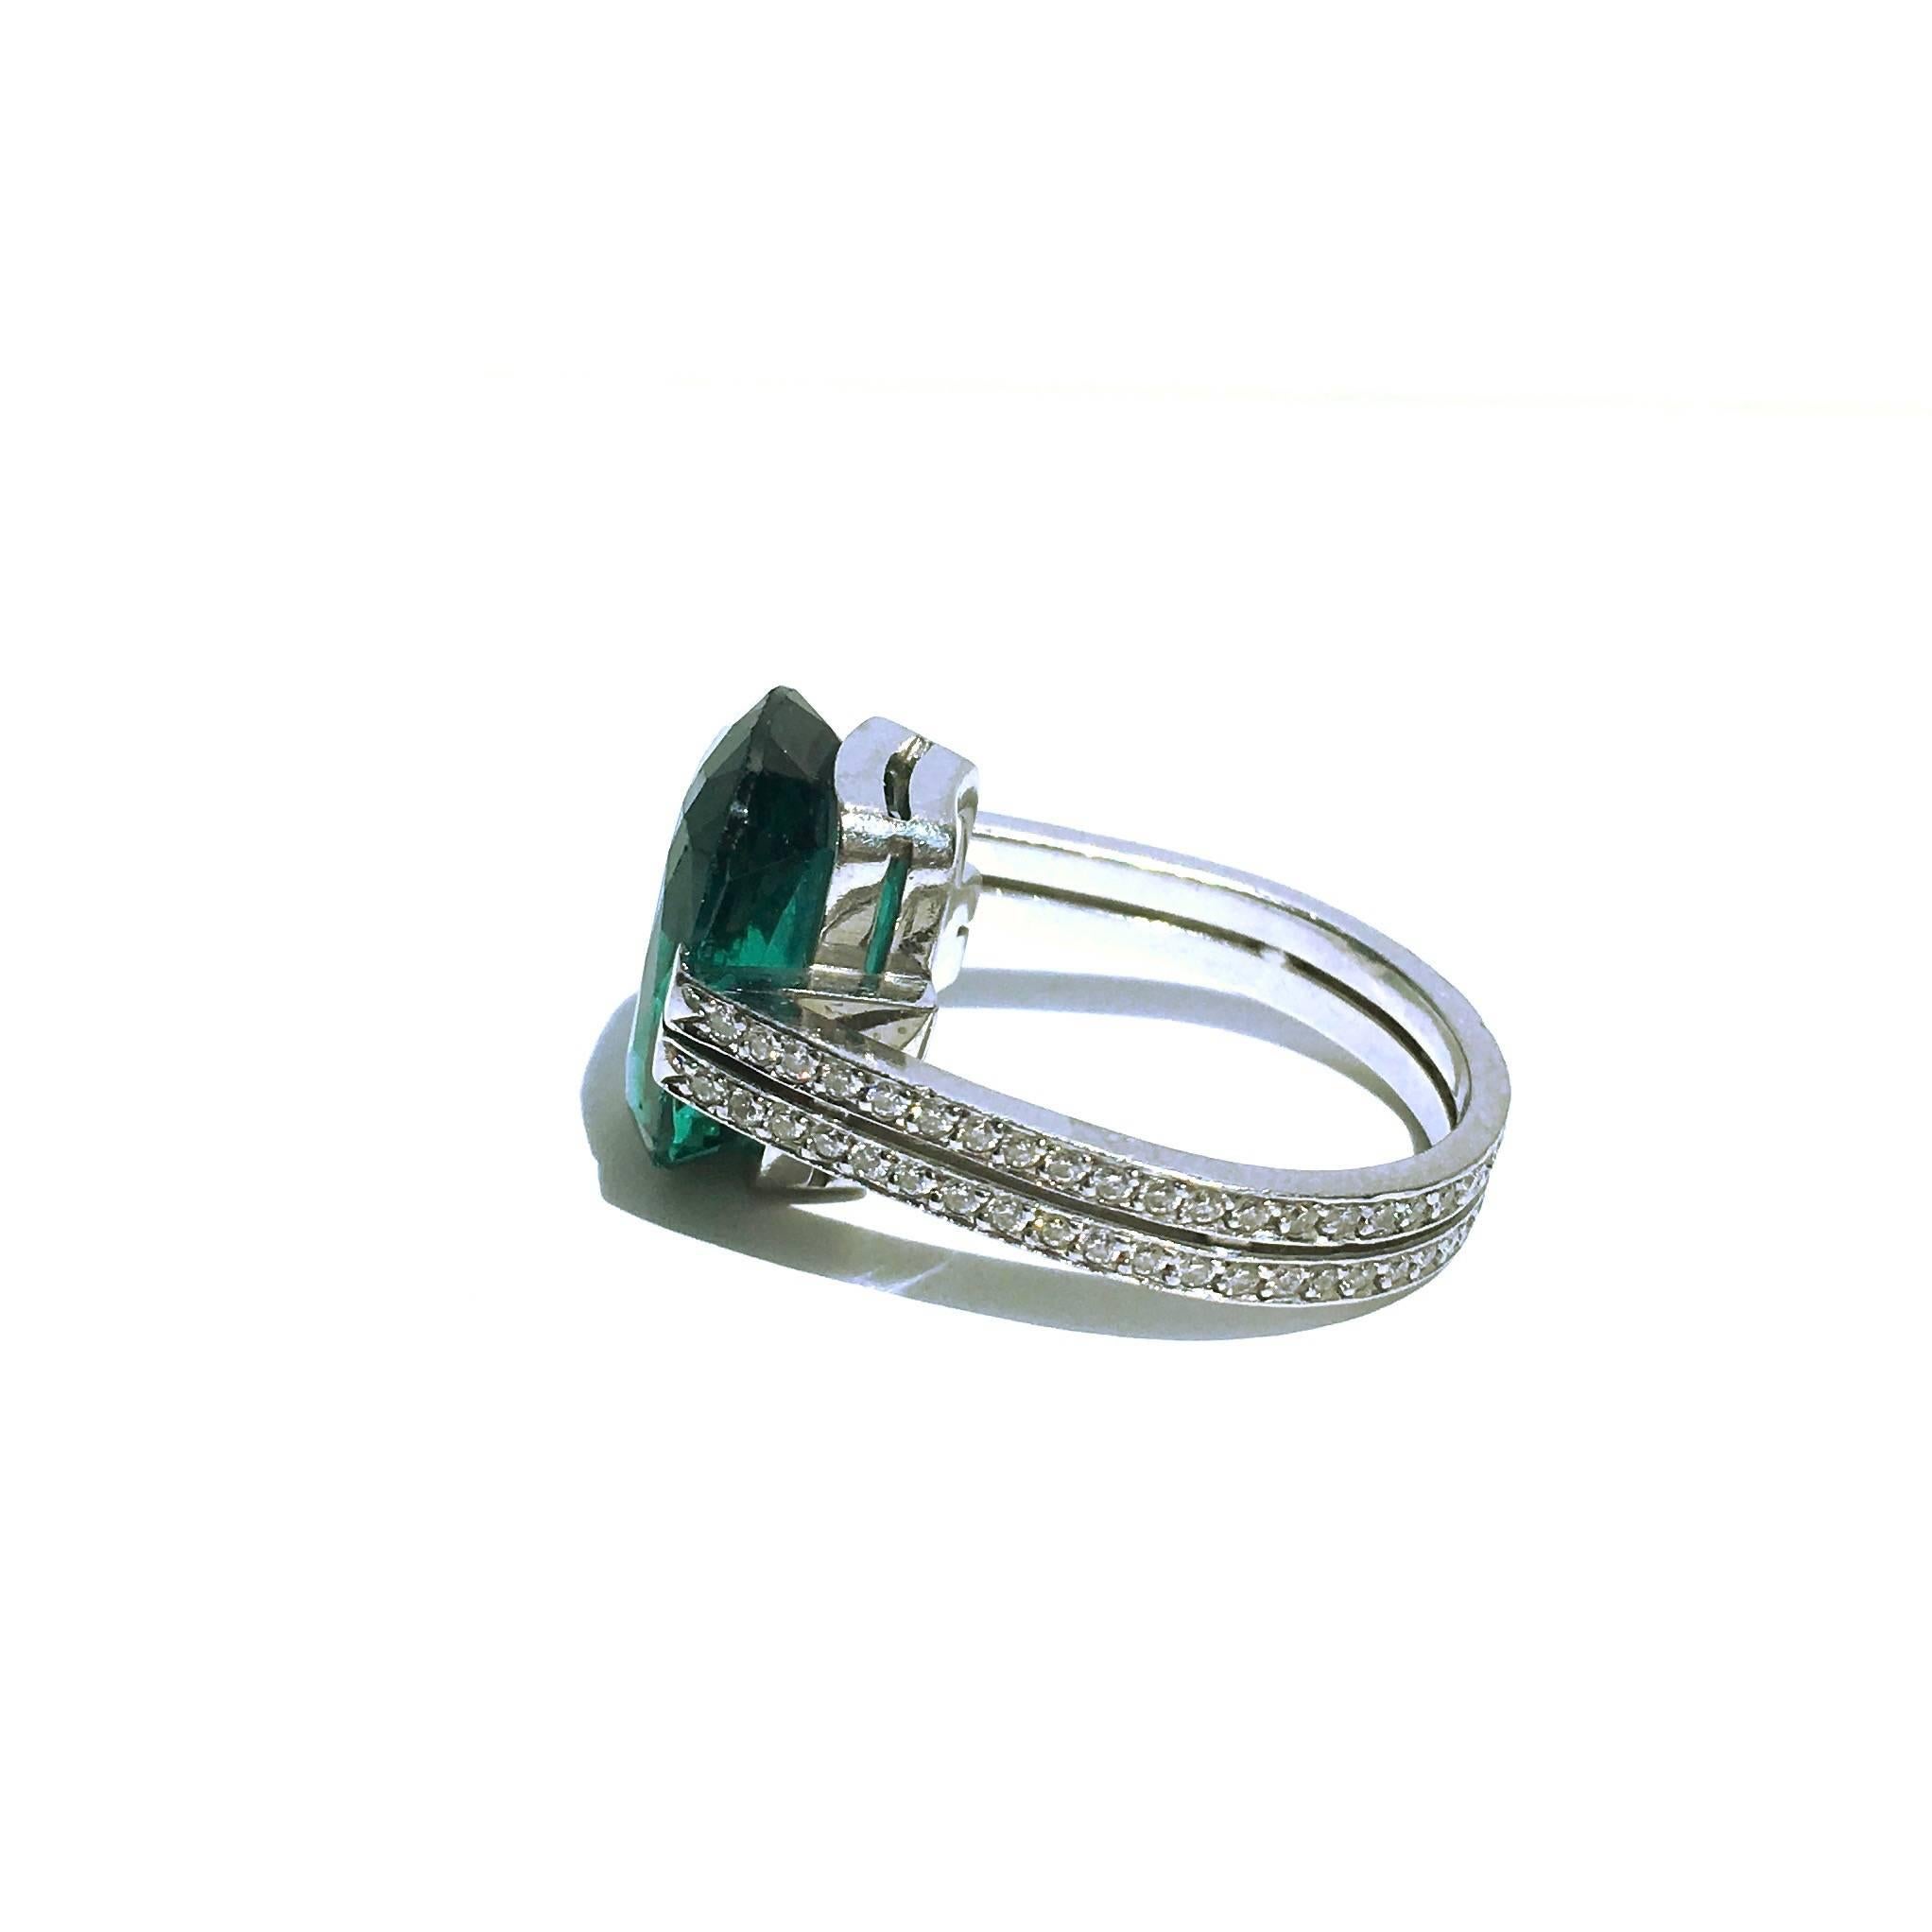 Tanagro platinum ring, featuring a mesmerizing 15 x 11 mm blue-green tourmaline (approx. 10ct), supprted by a 4 mm wide diamond set double platinum band. 86 diamonds, approx. total weight of 1.00ct.
Size: 7.5
Weight: 11.1 grams

Pietro